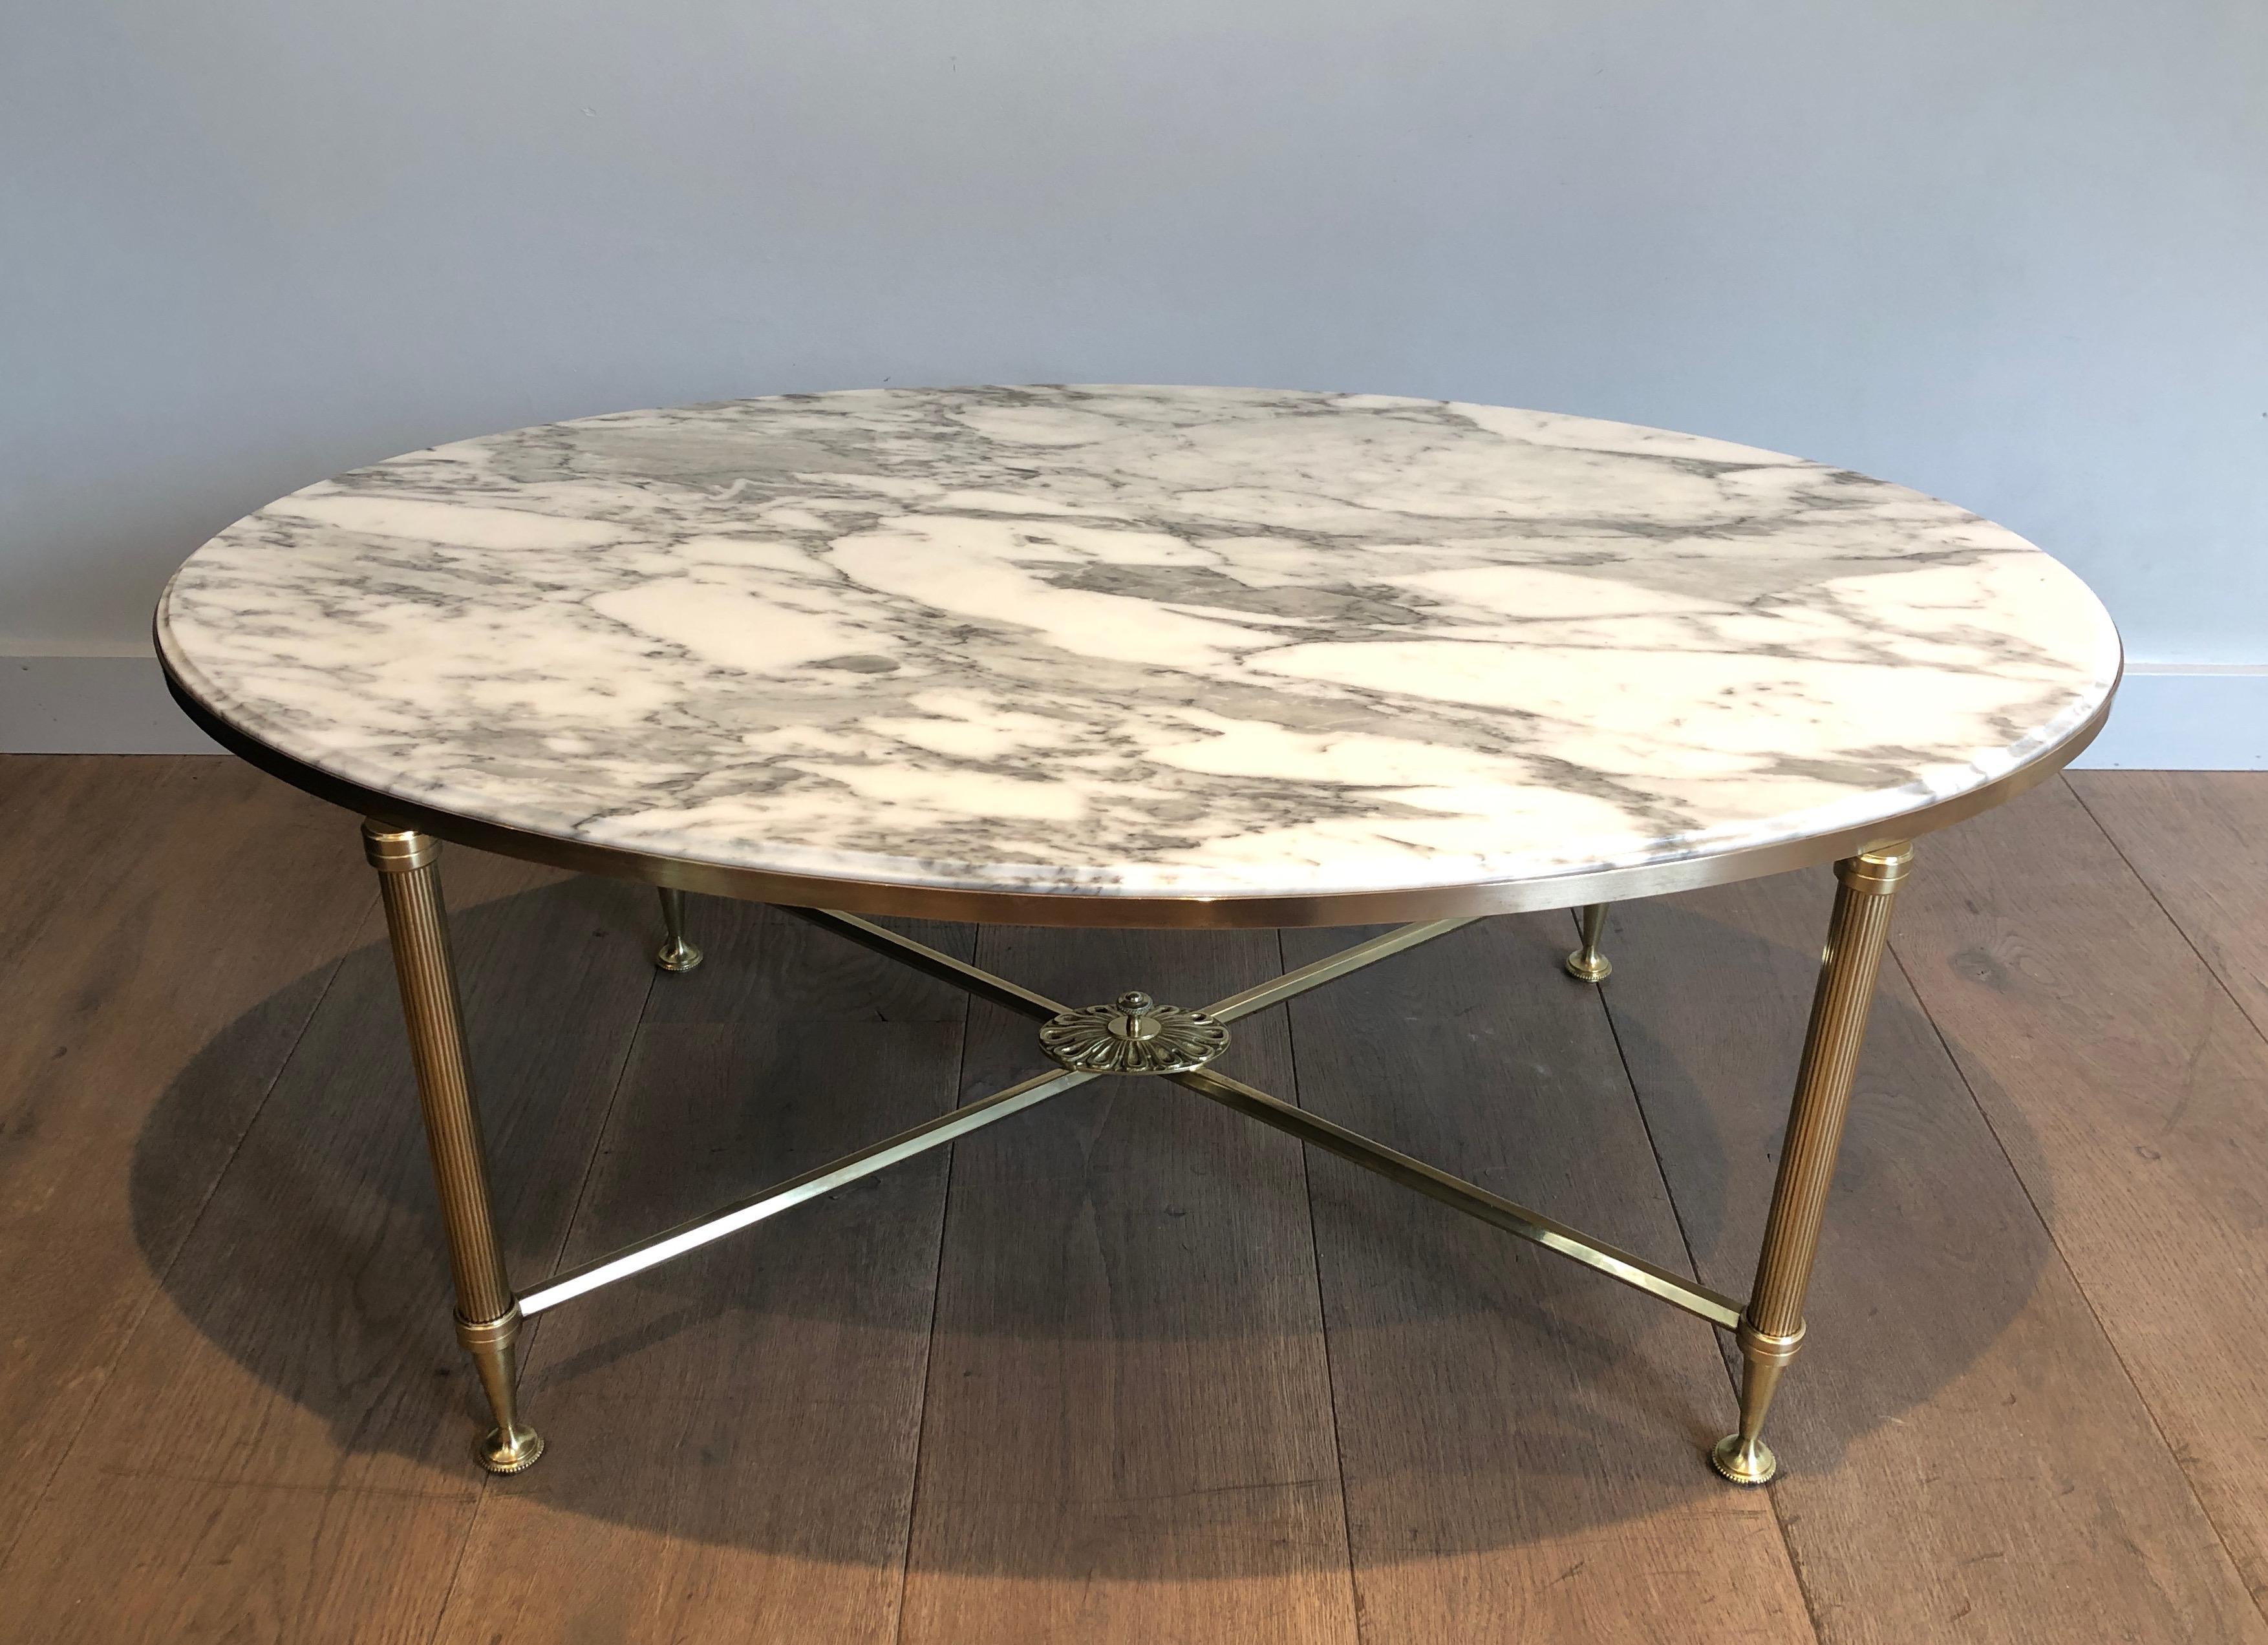 Neoclassical Rare Oval Brass Coffee Table with Carrara white Marble Top by Maison Jansen For Sale